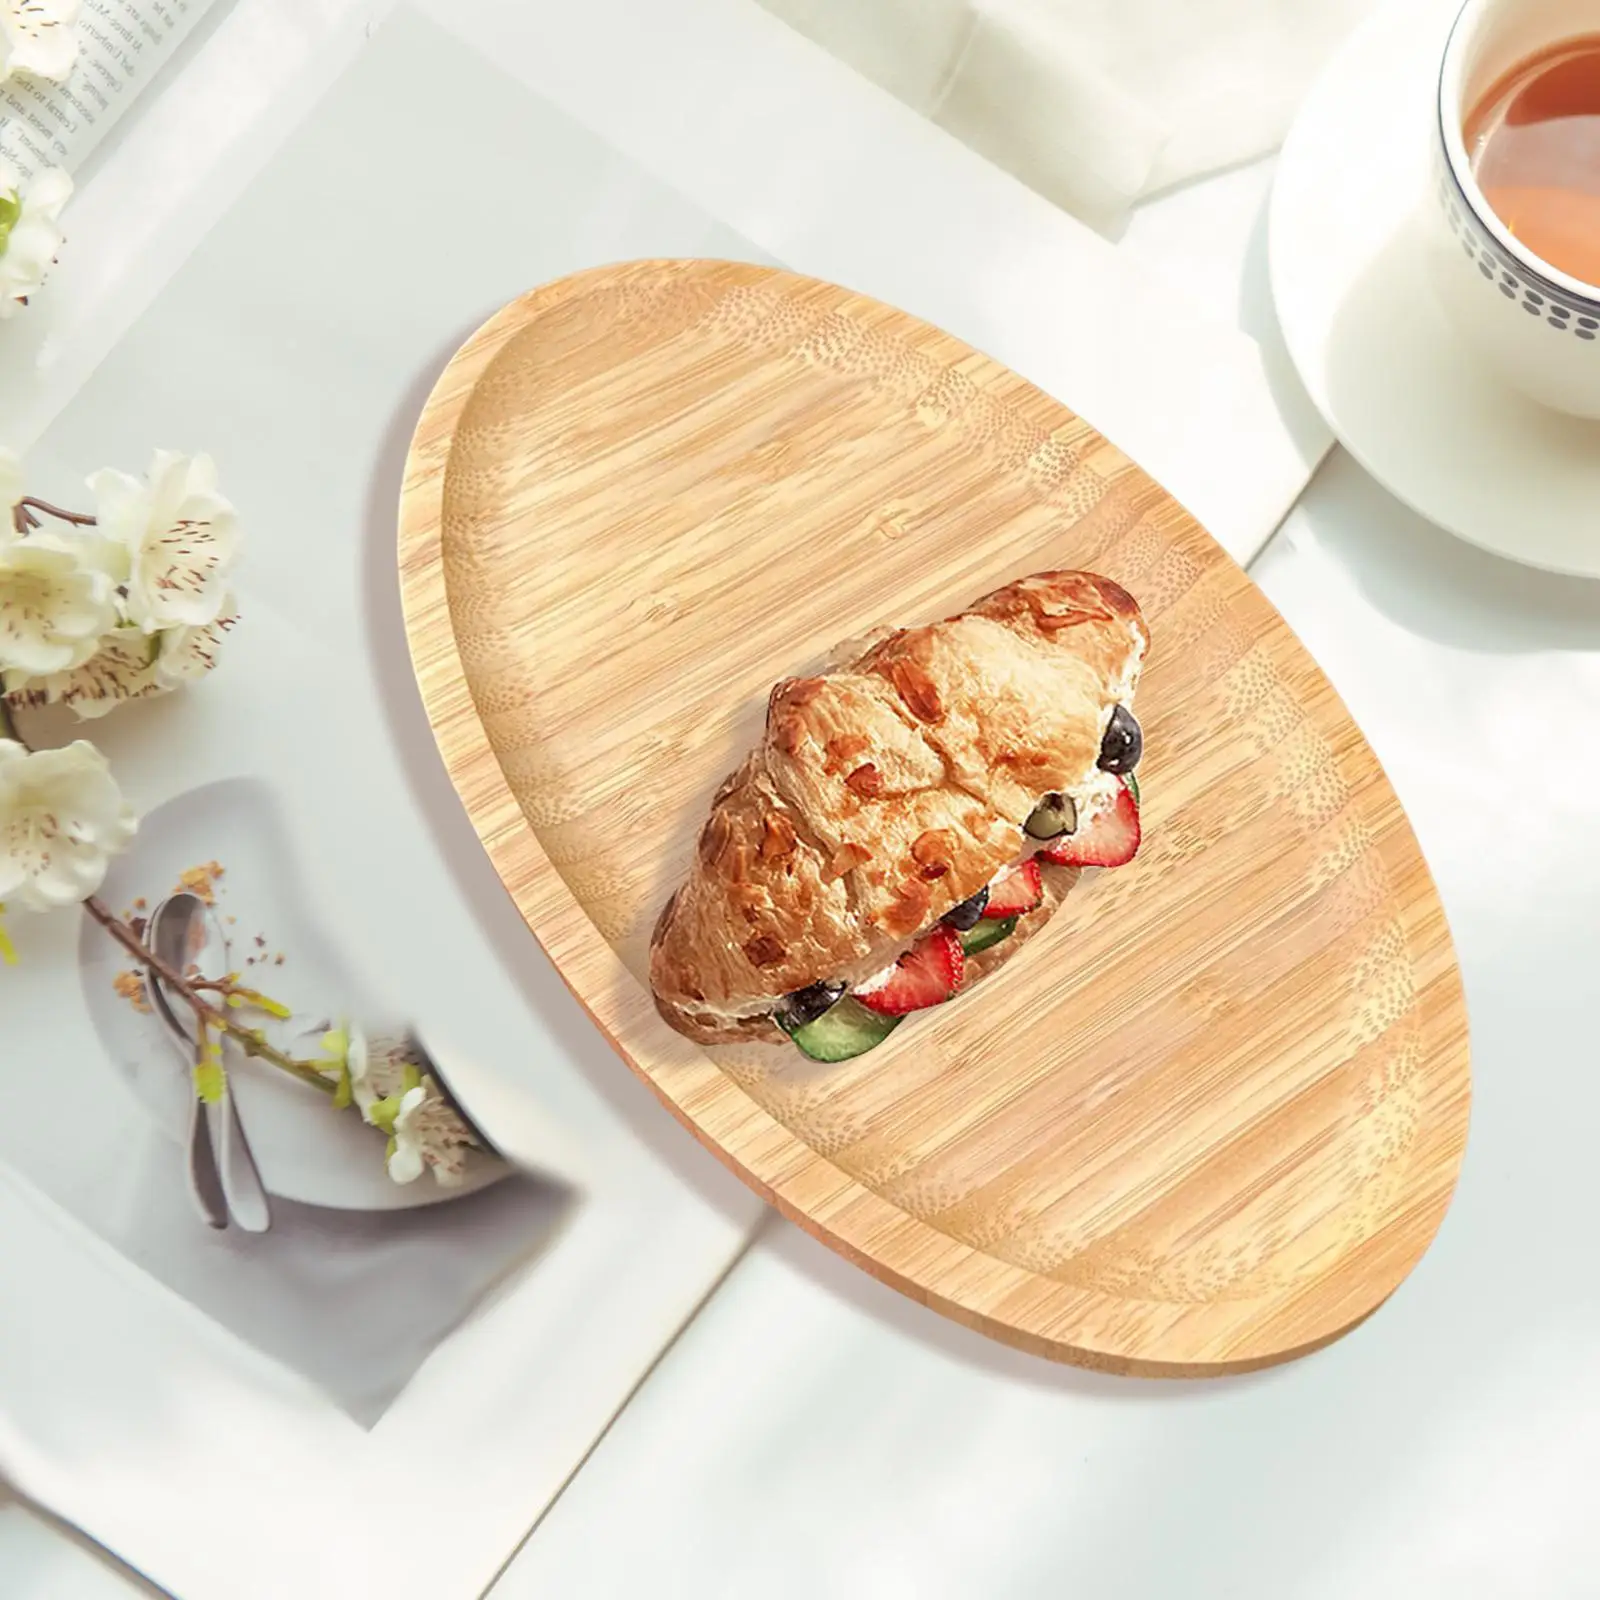 Wood Tray Housewarming Gift Farmhouse Decorative Tray for Home Kitchen Decor Coffee Table Afternoon Tea Bread Meat Vegetables